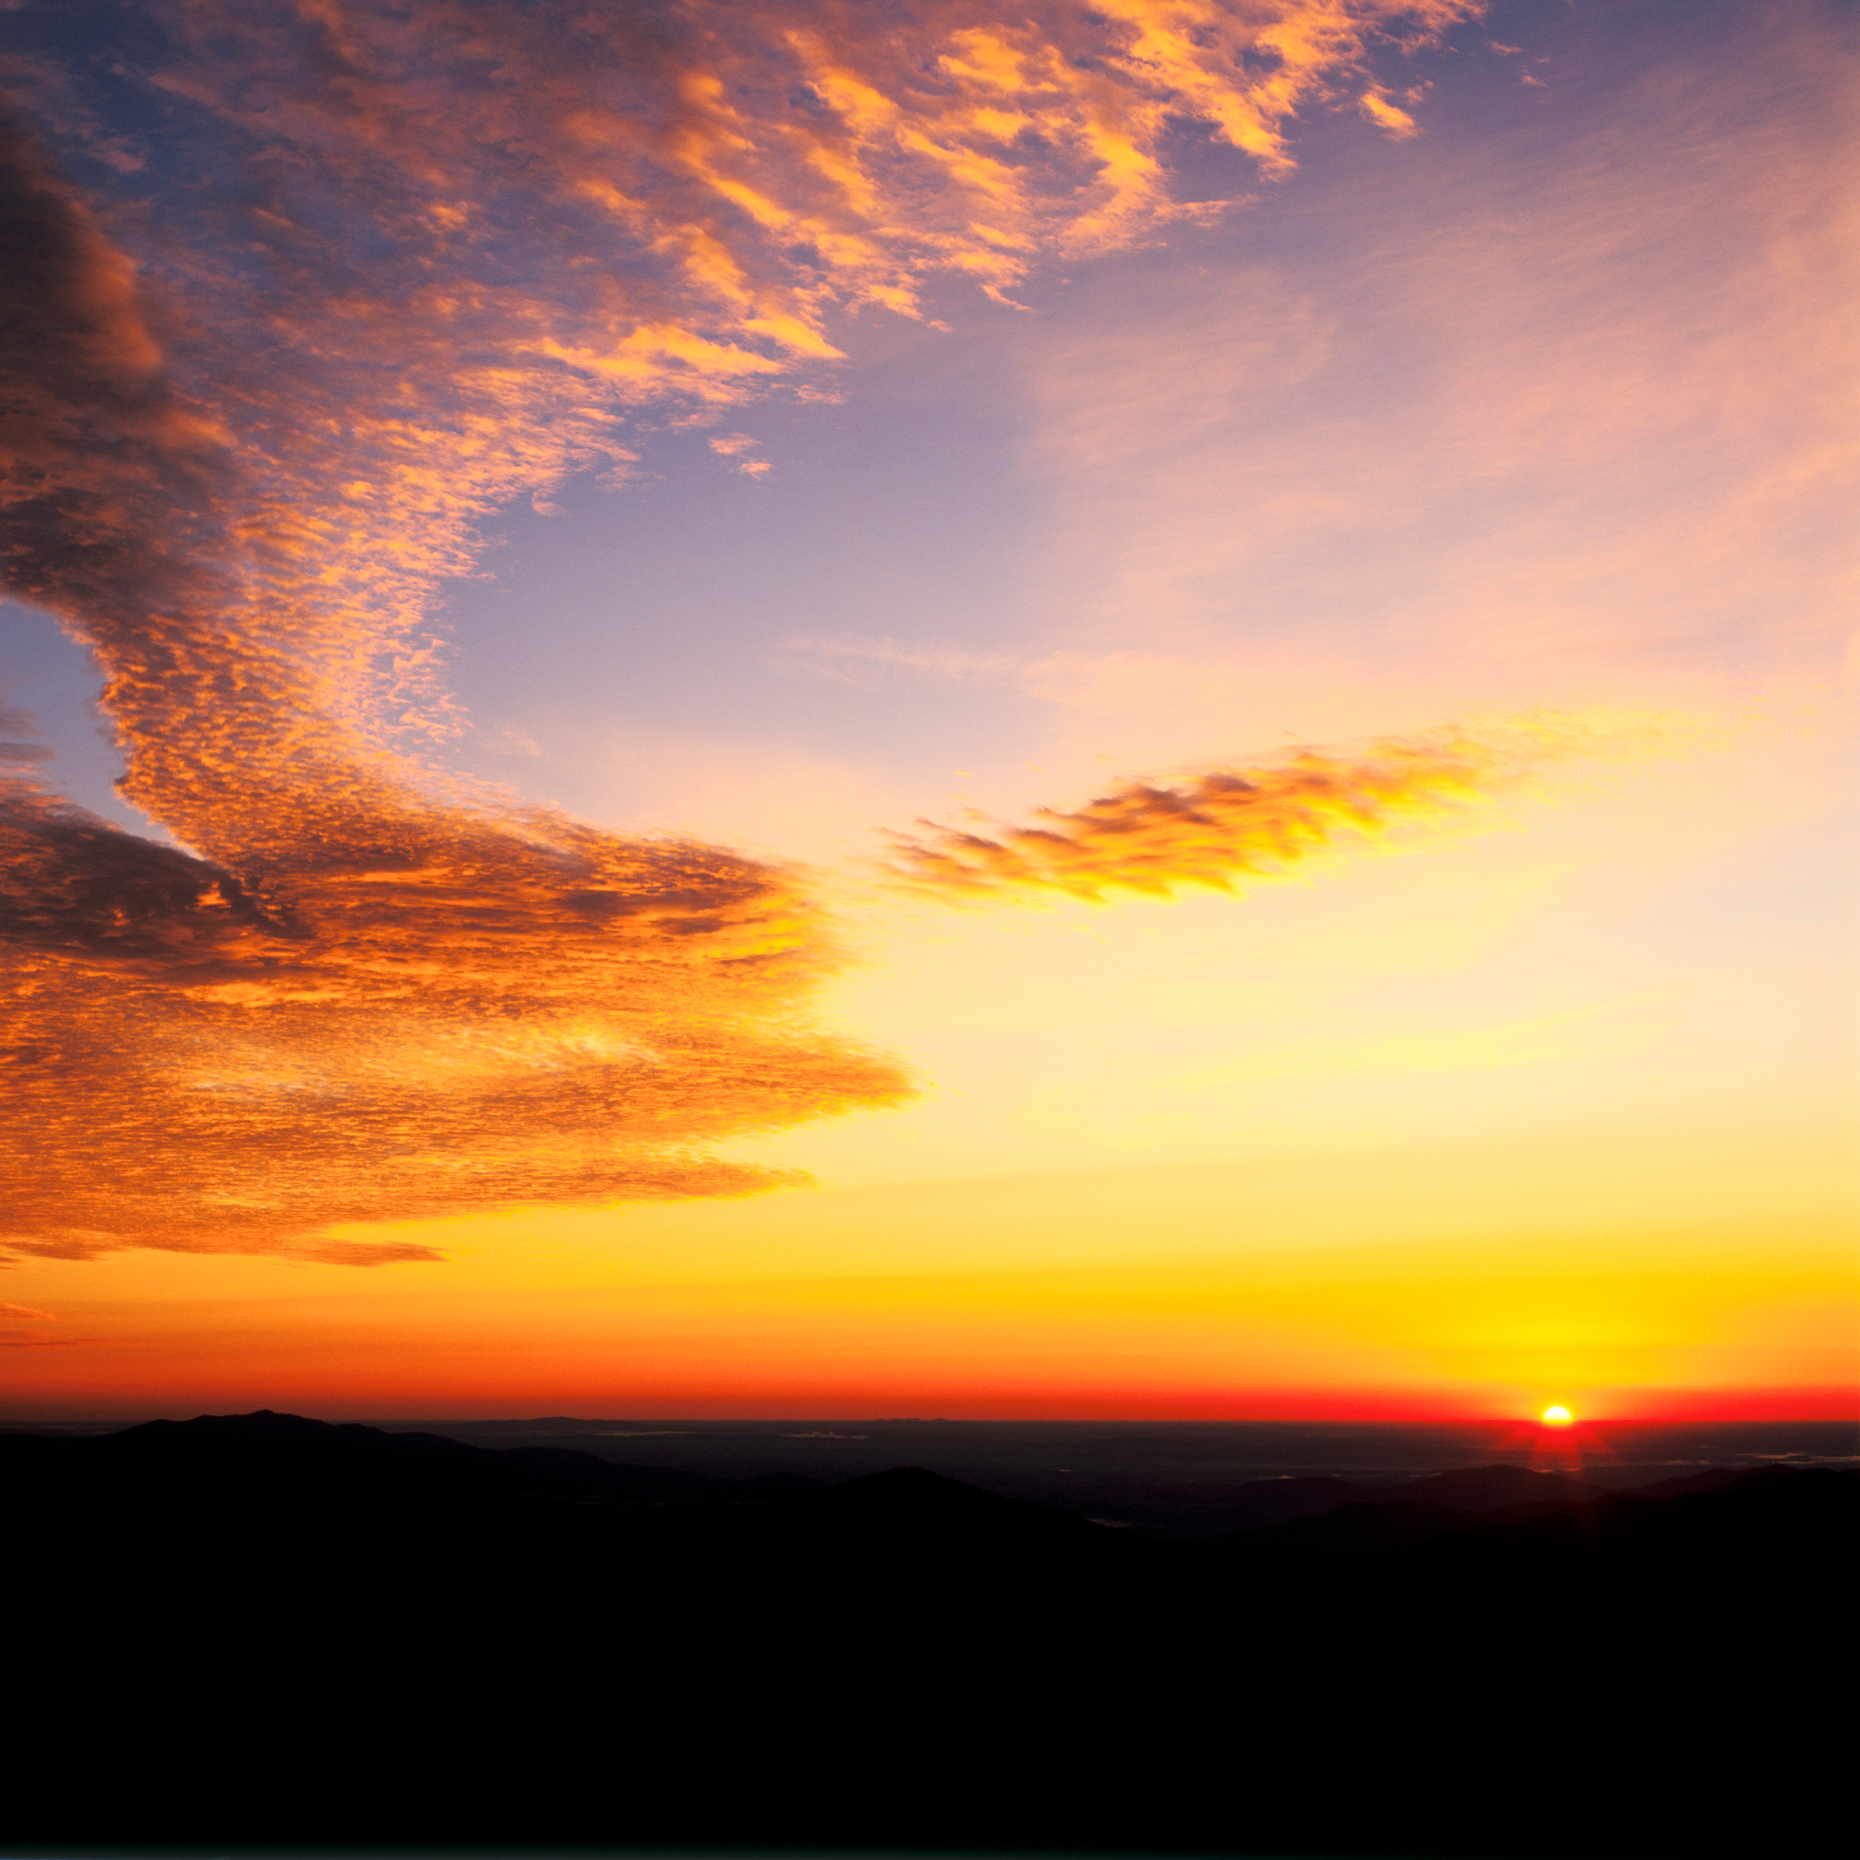 Sunrise sky over Blue Ridge Mountains, viewed from the Blue Ridge Parkway